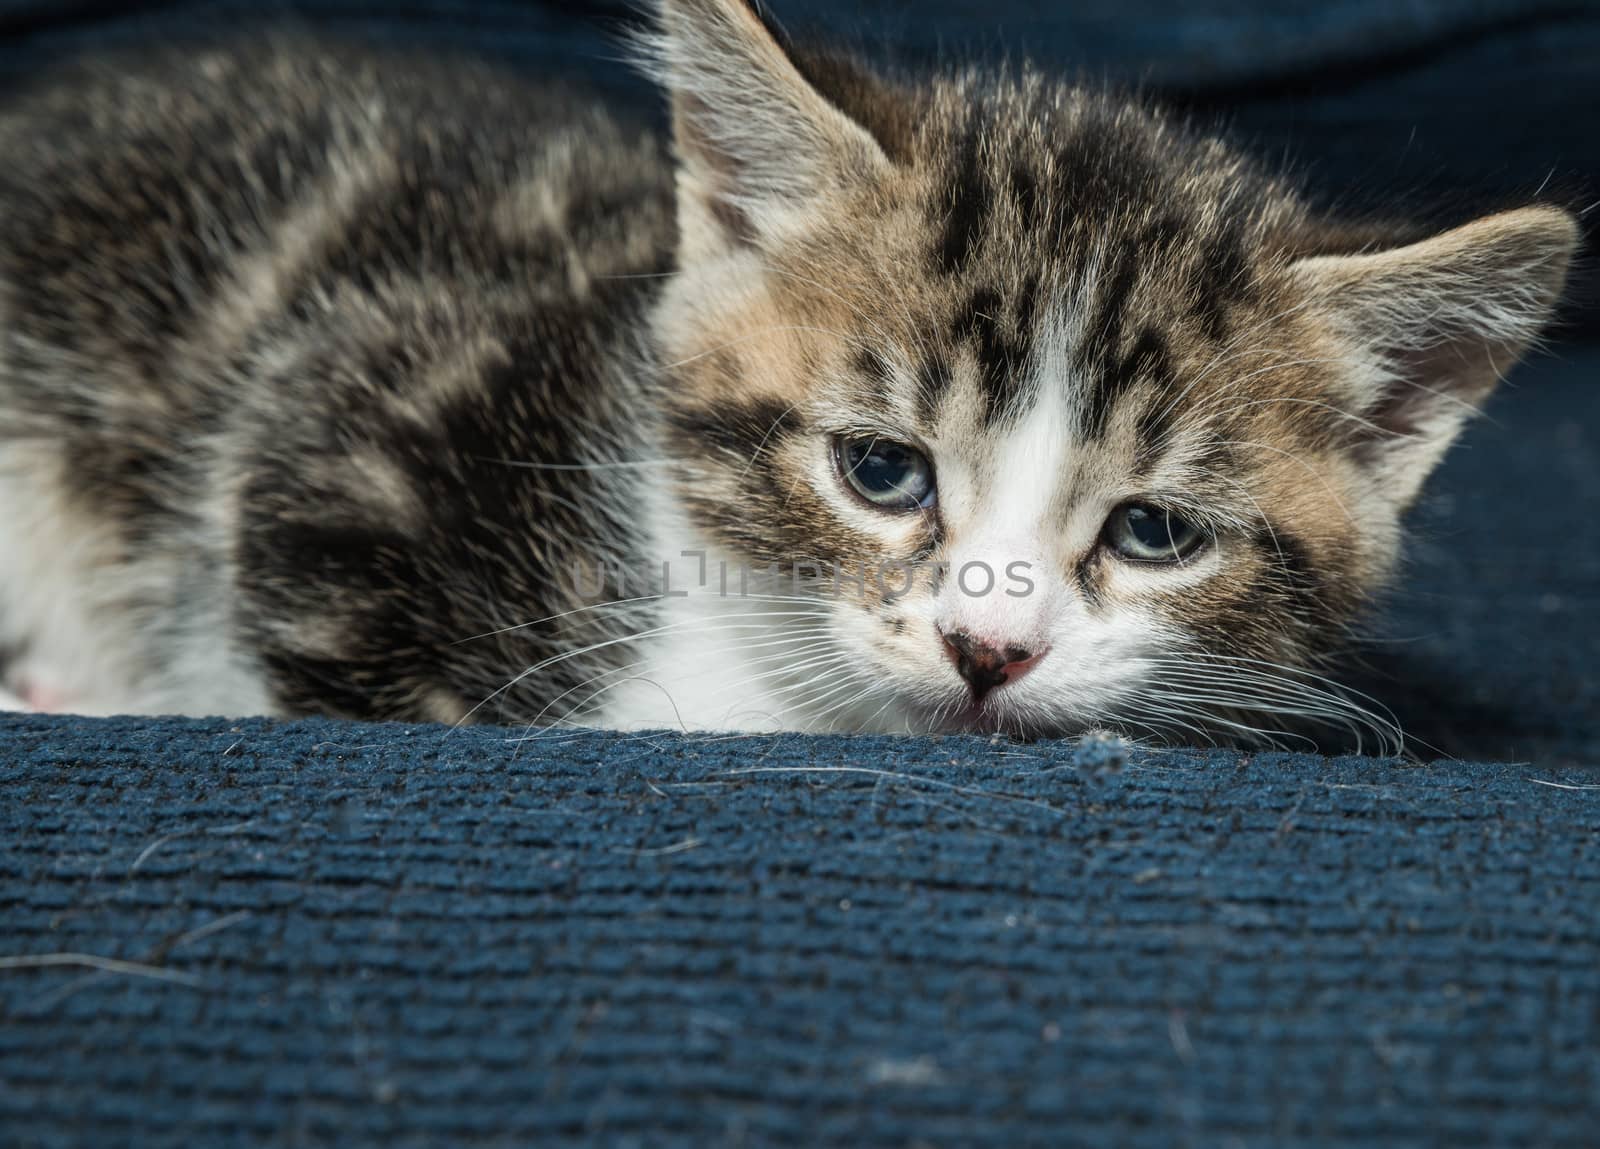 Sleepy baby cat on couch by IVYPHOTOS